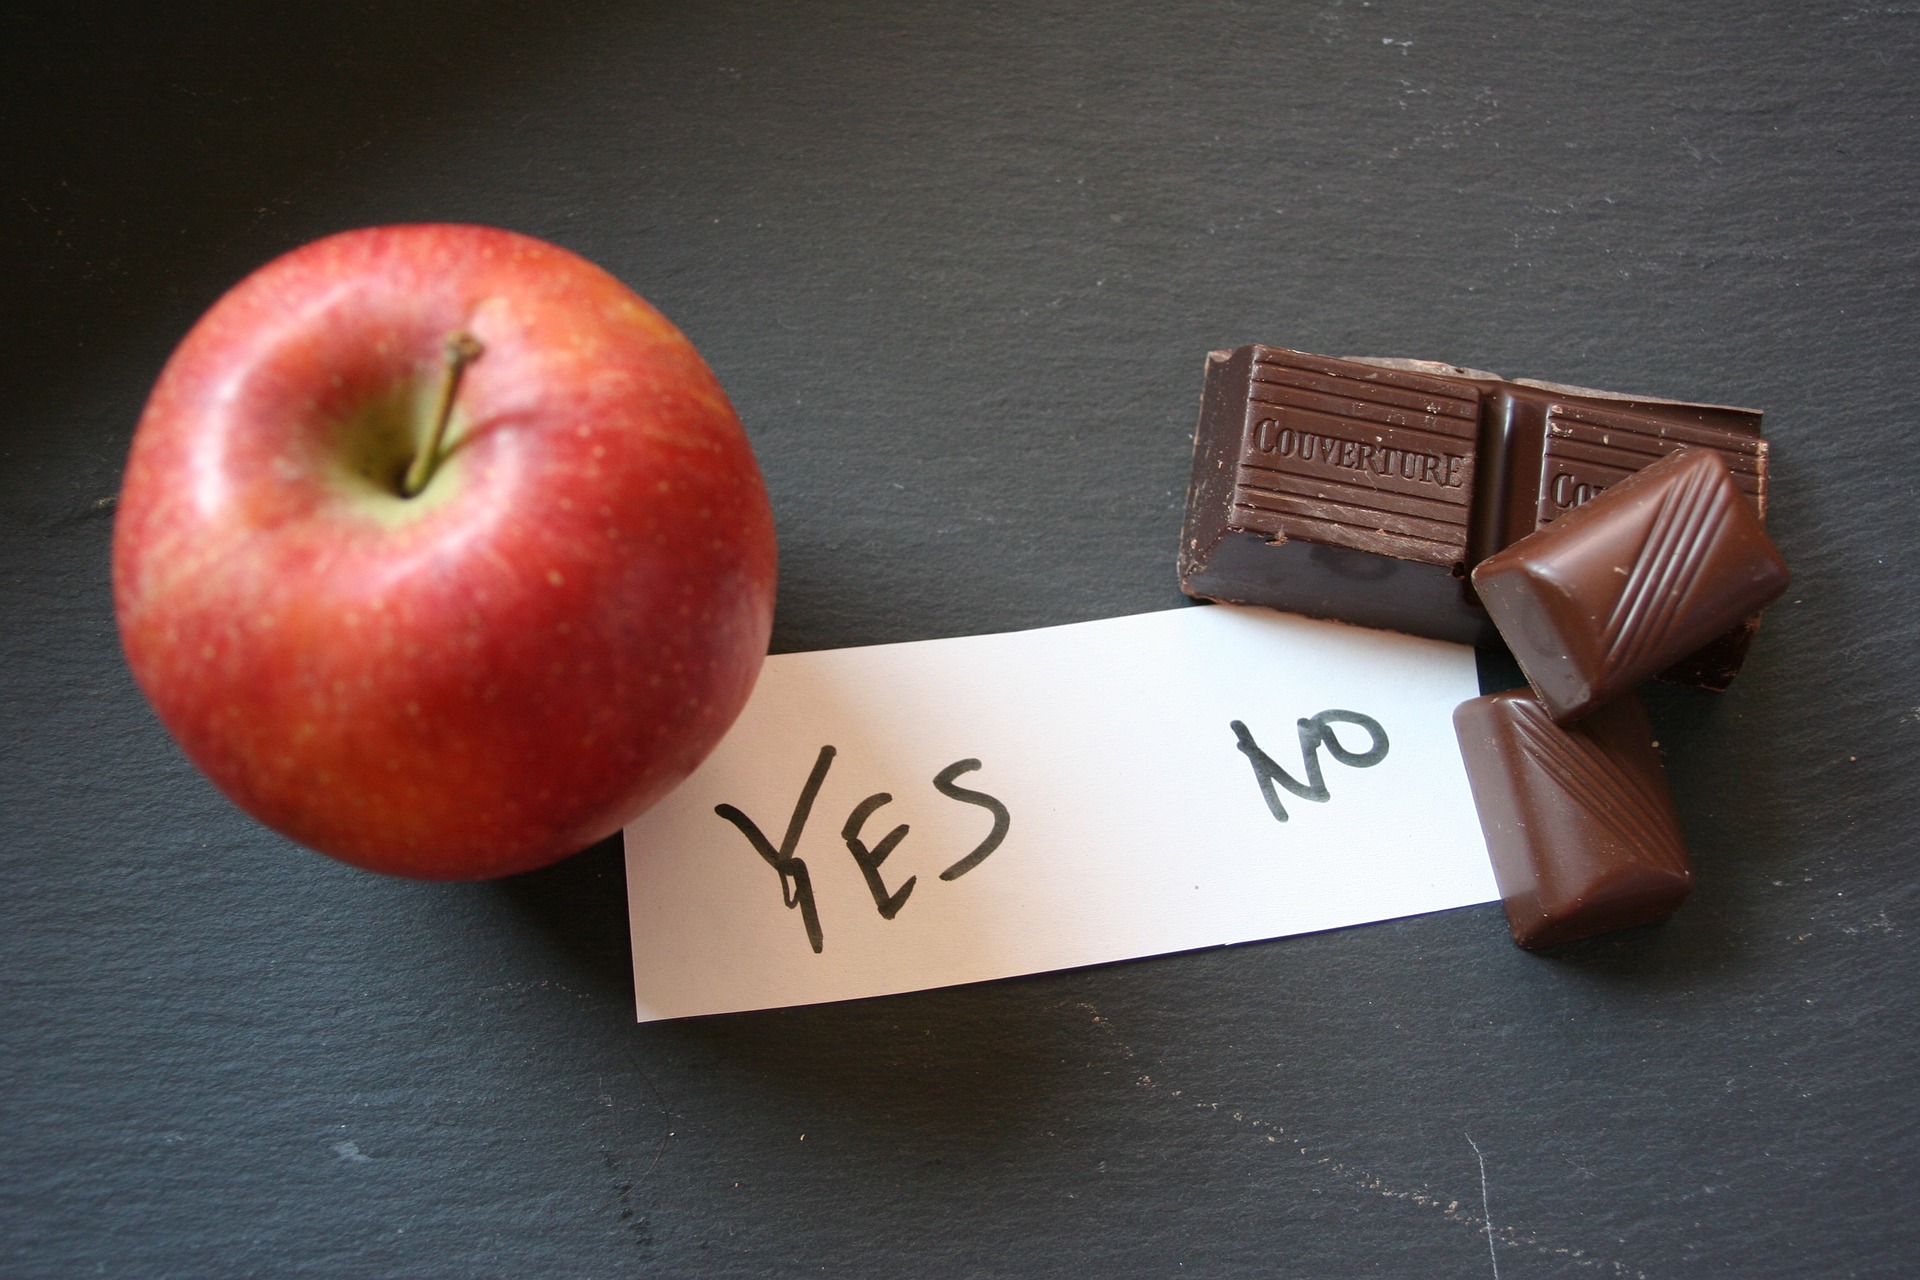 An apple and a piece of chocolate sit on a table with a piece of paper between them reading Yes on the apple side and No on the chocolate side.